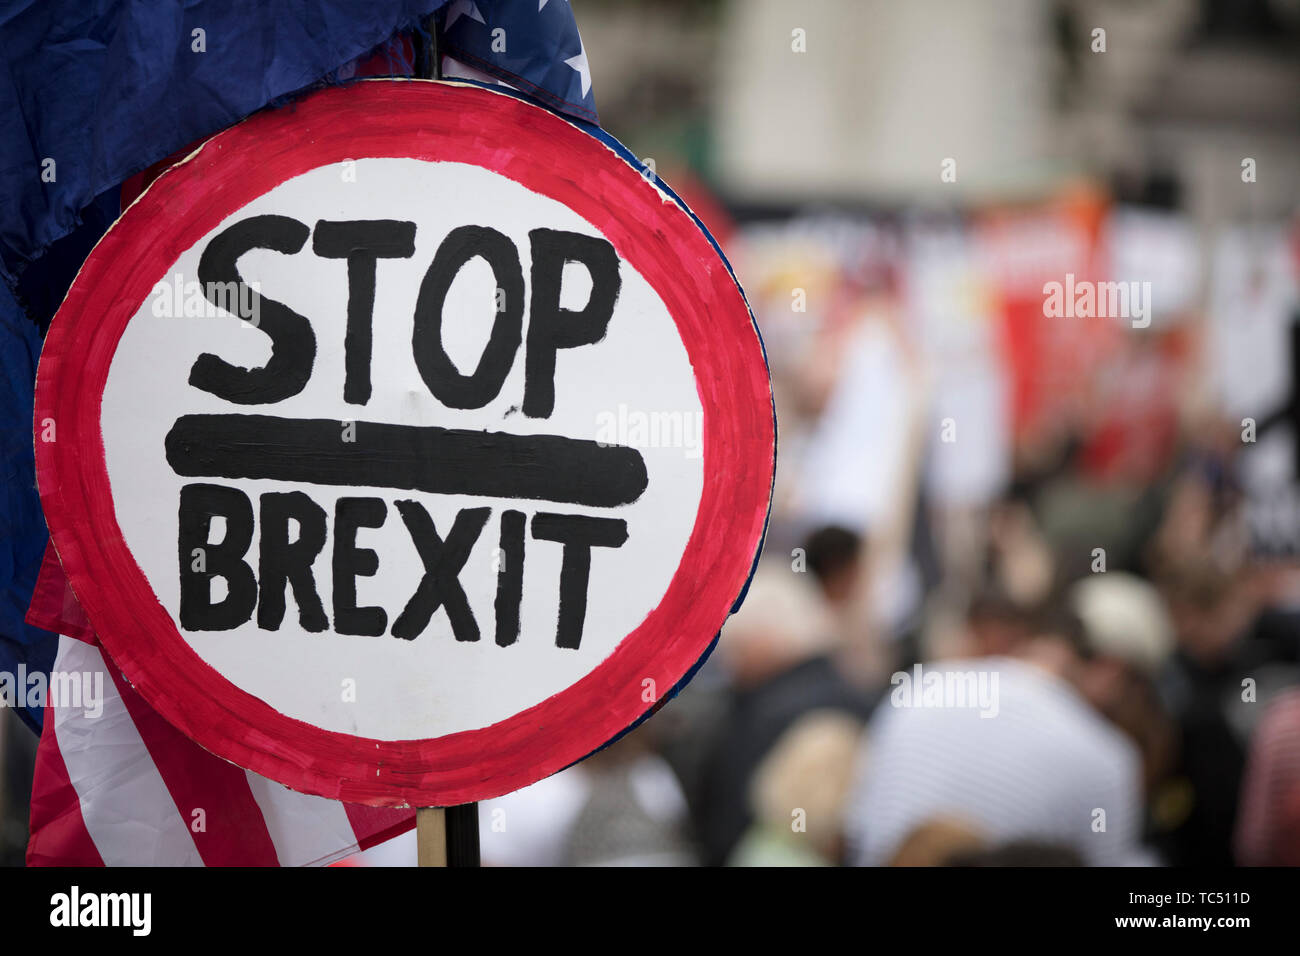 Stop brexit sign at a political protest in London Stock Photo